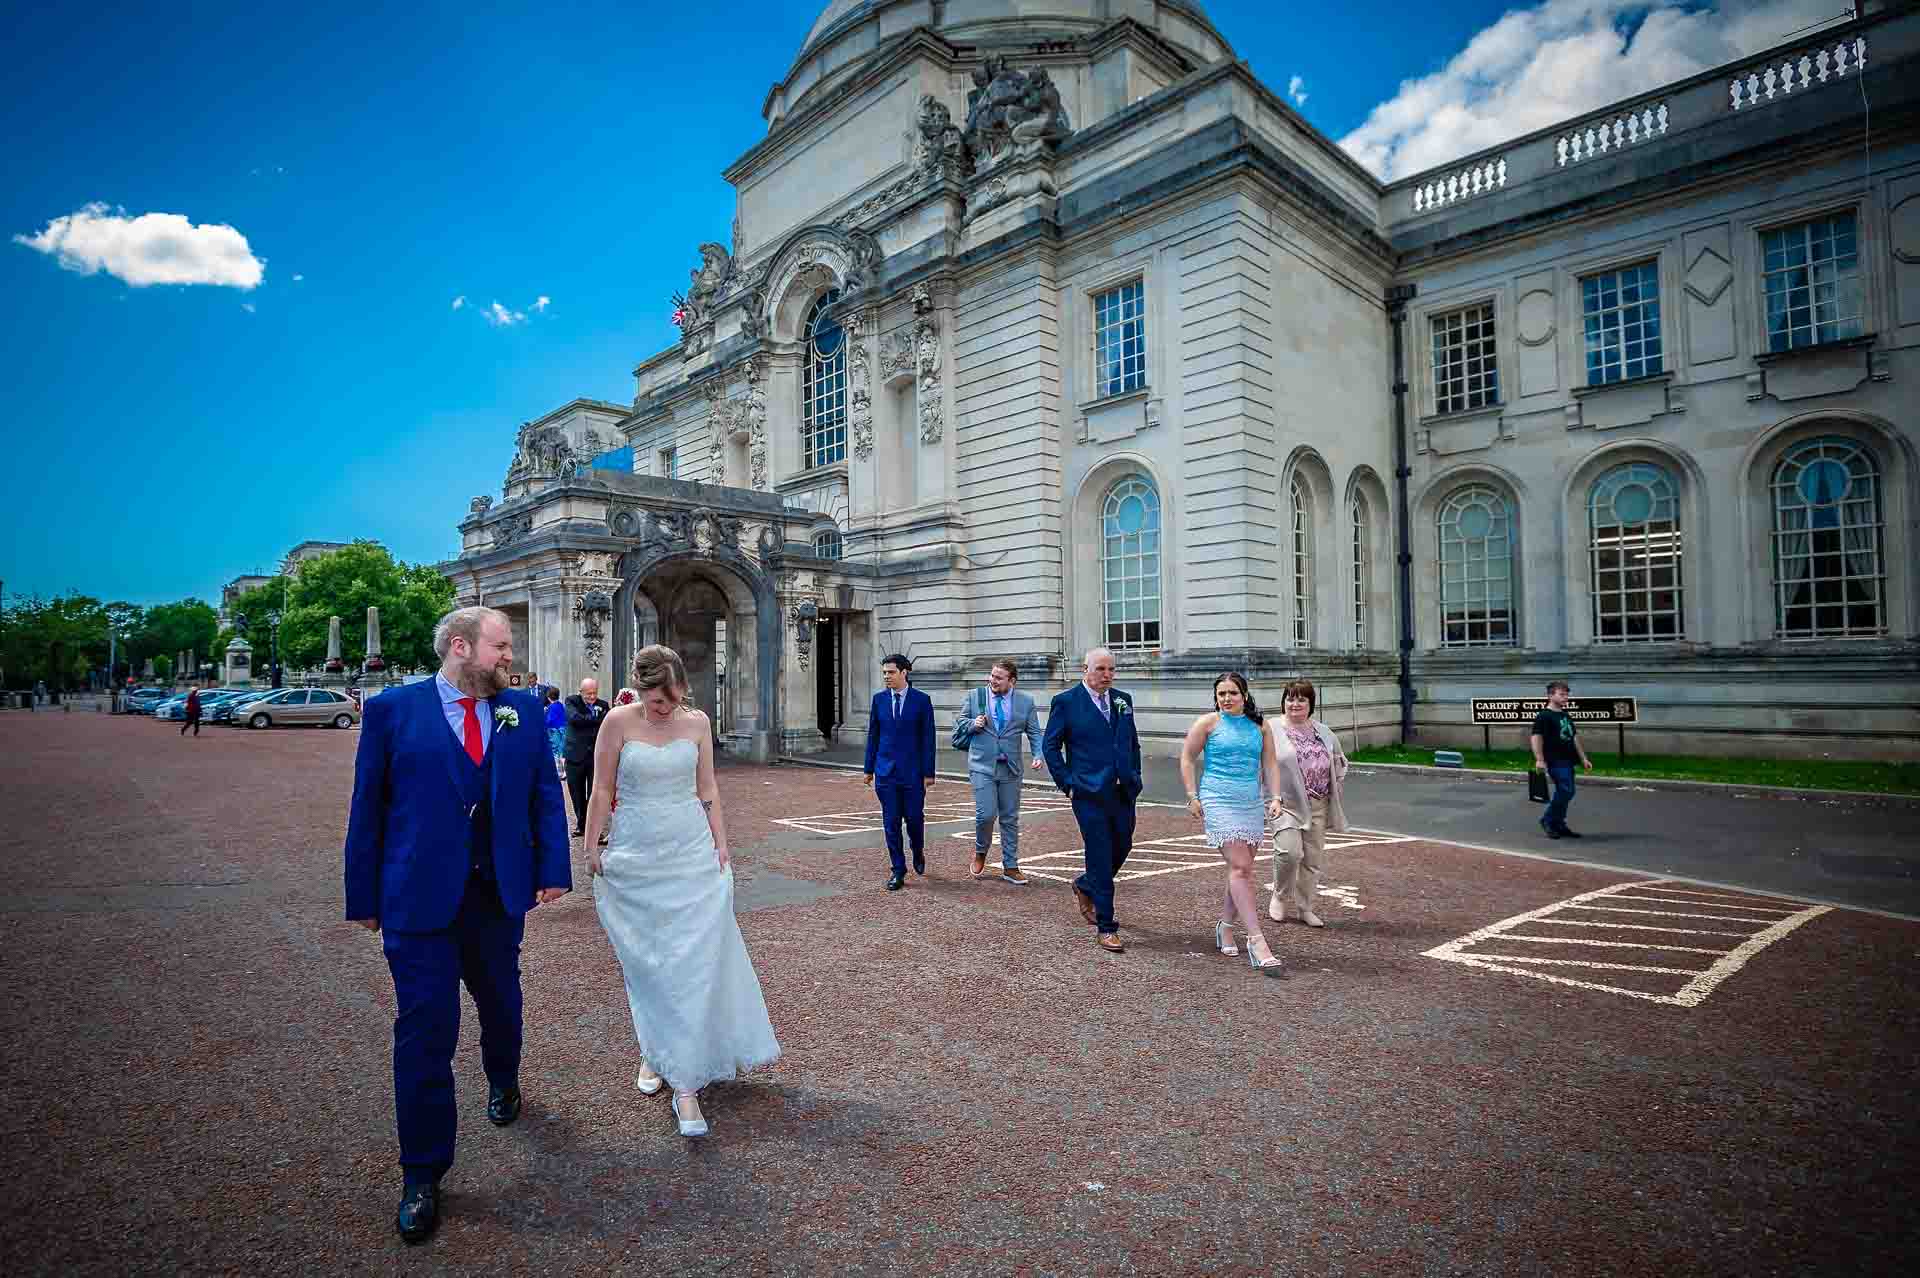 Bridal party walking away from City Hall in Cardiff after wedding